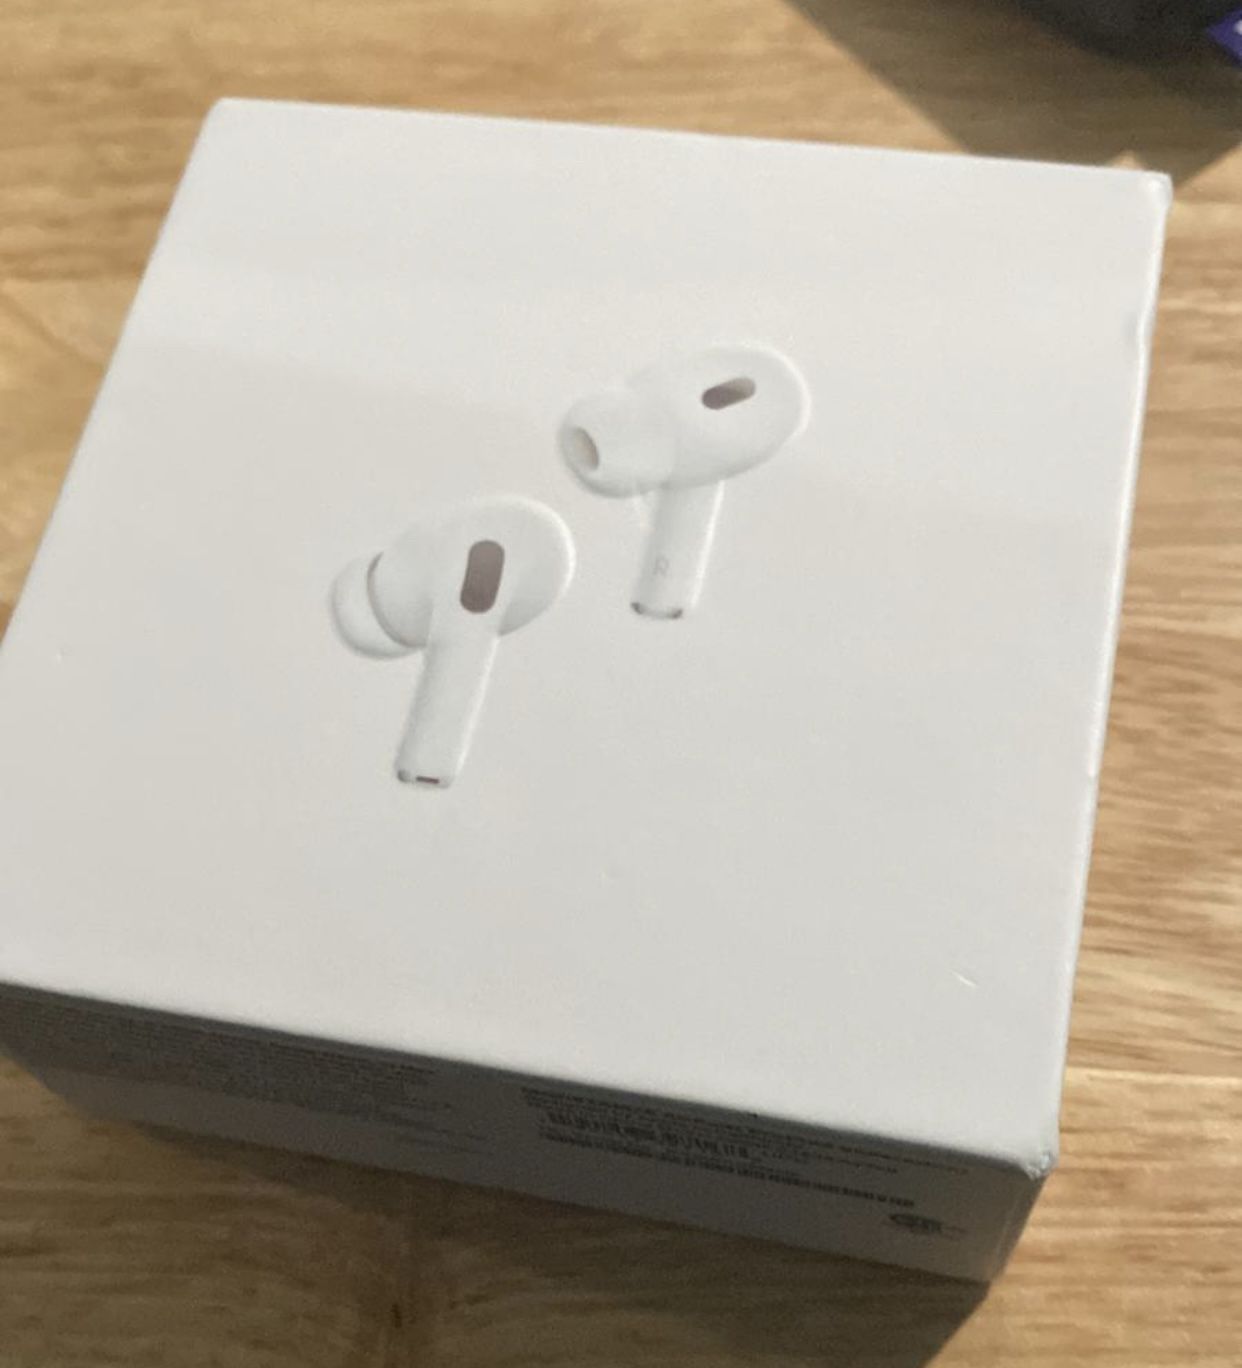 Airpod Pros for sale $175